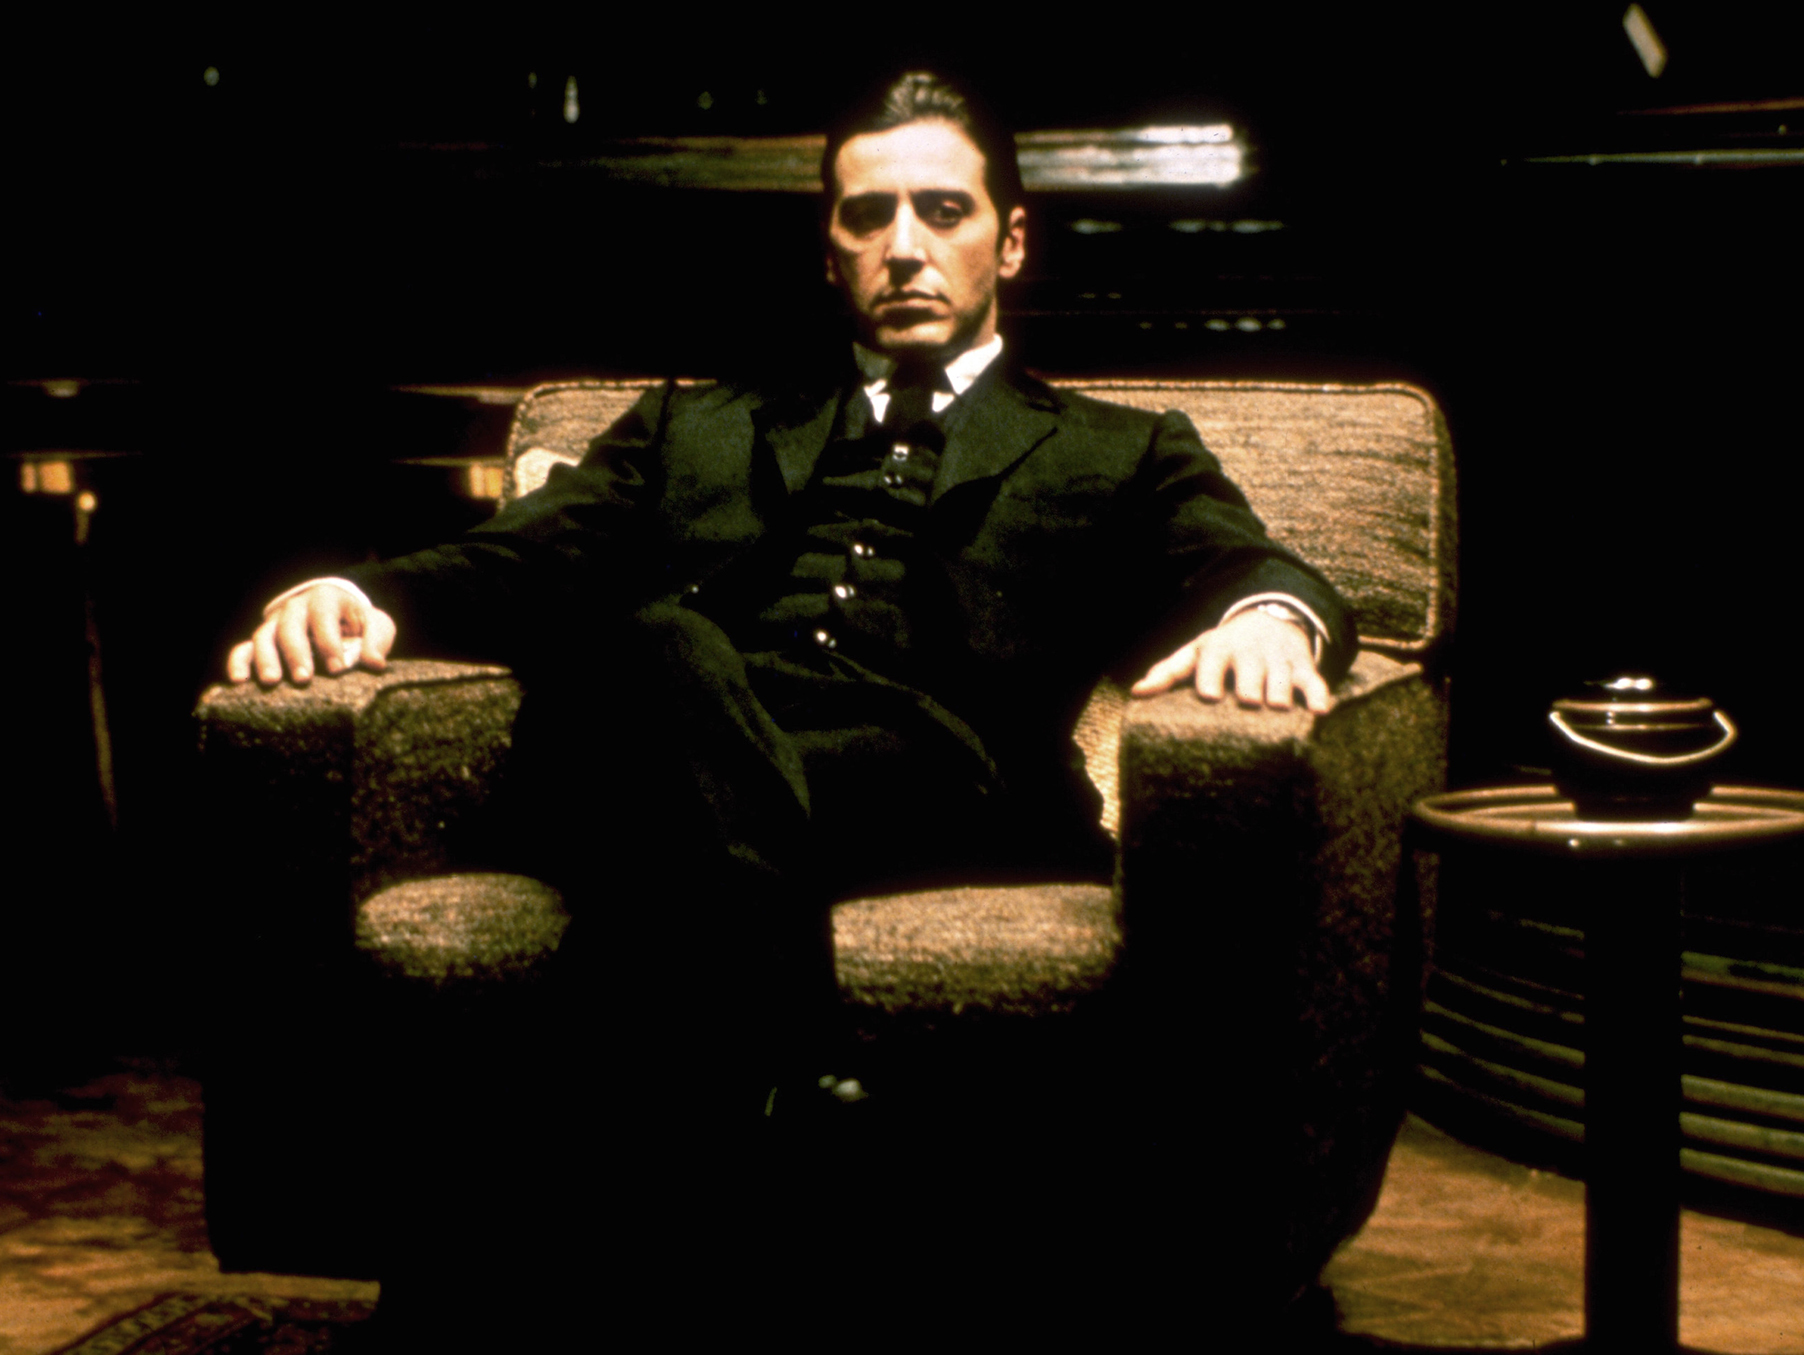 The Godfather Part II Gangster movies